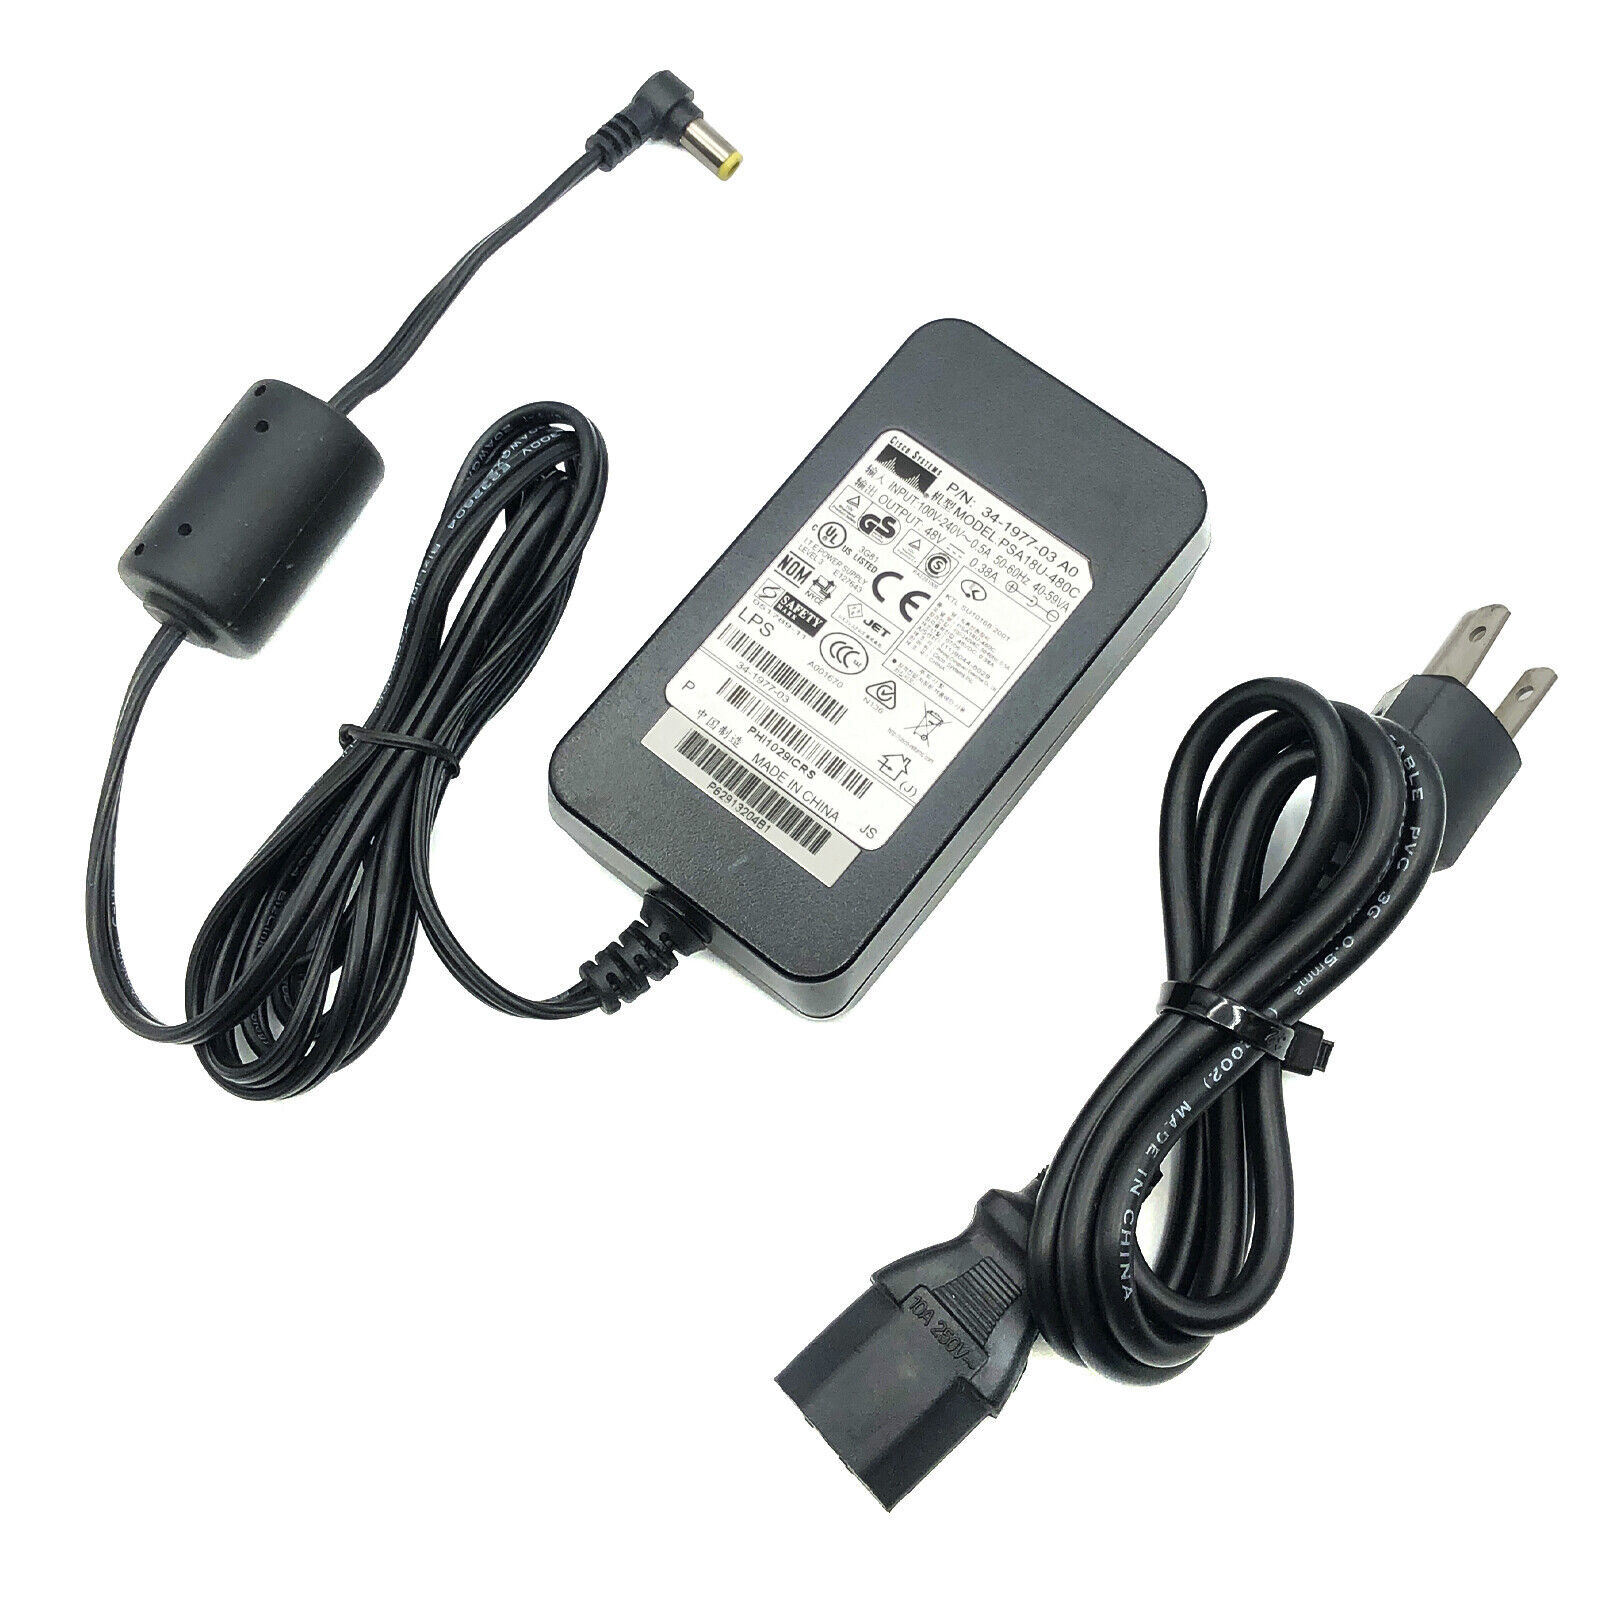 NEW Genuine Cisco CP-PWR-CUBE-3 AC Adapter 341-0206-03 IP Phone Charger w/PC OEM